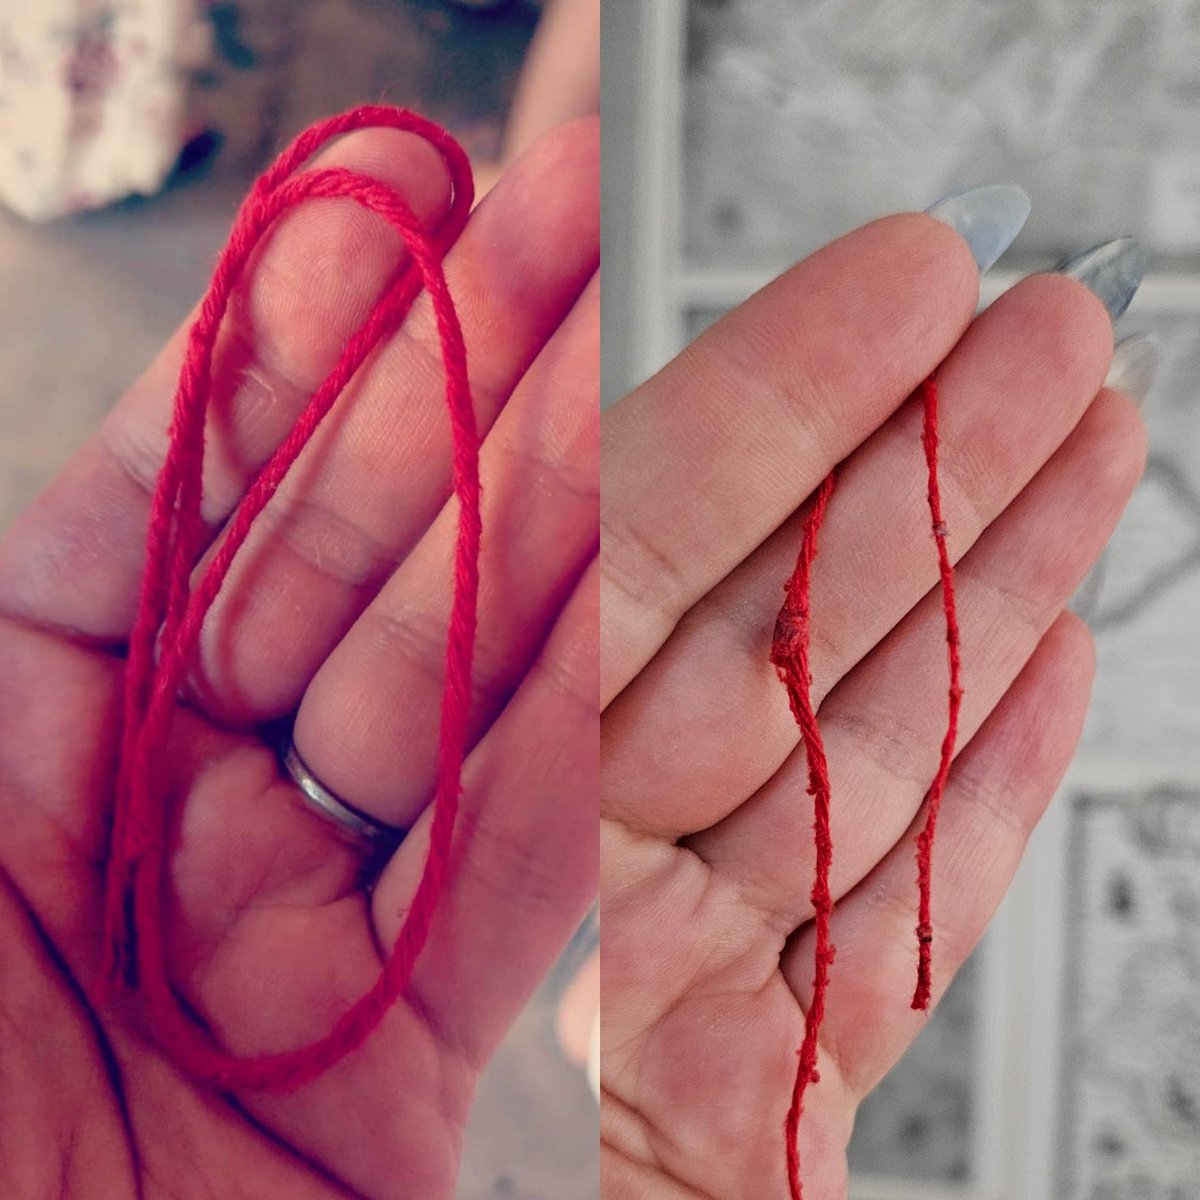 5 years apart, I chose to cut my string! I was delaying to fullfil the promise I made, bacause I wanted to have this peace of heaven with me, always. But I am ready now 😭❣️ Thank you for being there for me!  #MarsIsland2019 @JaredLeto @ShannonLeto @30SECONDSTOMARS